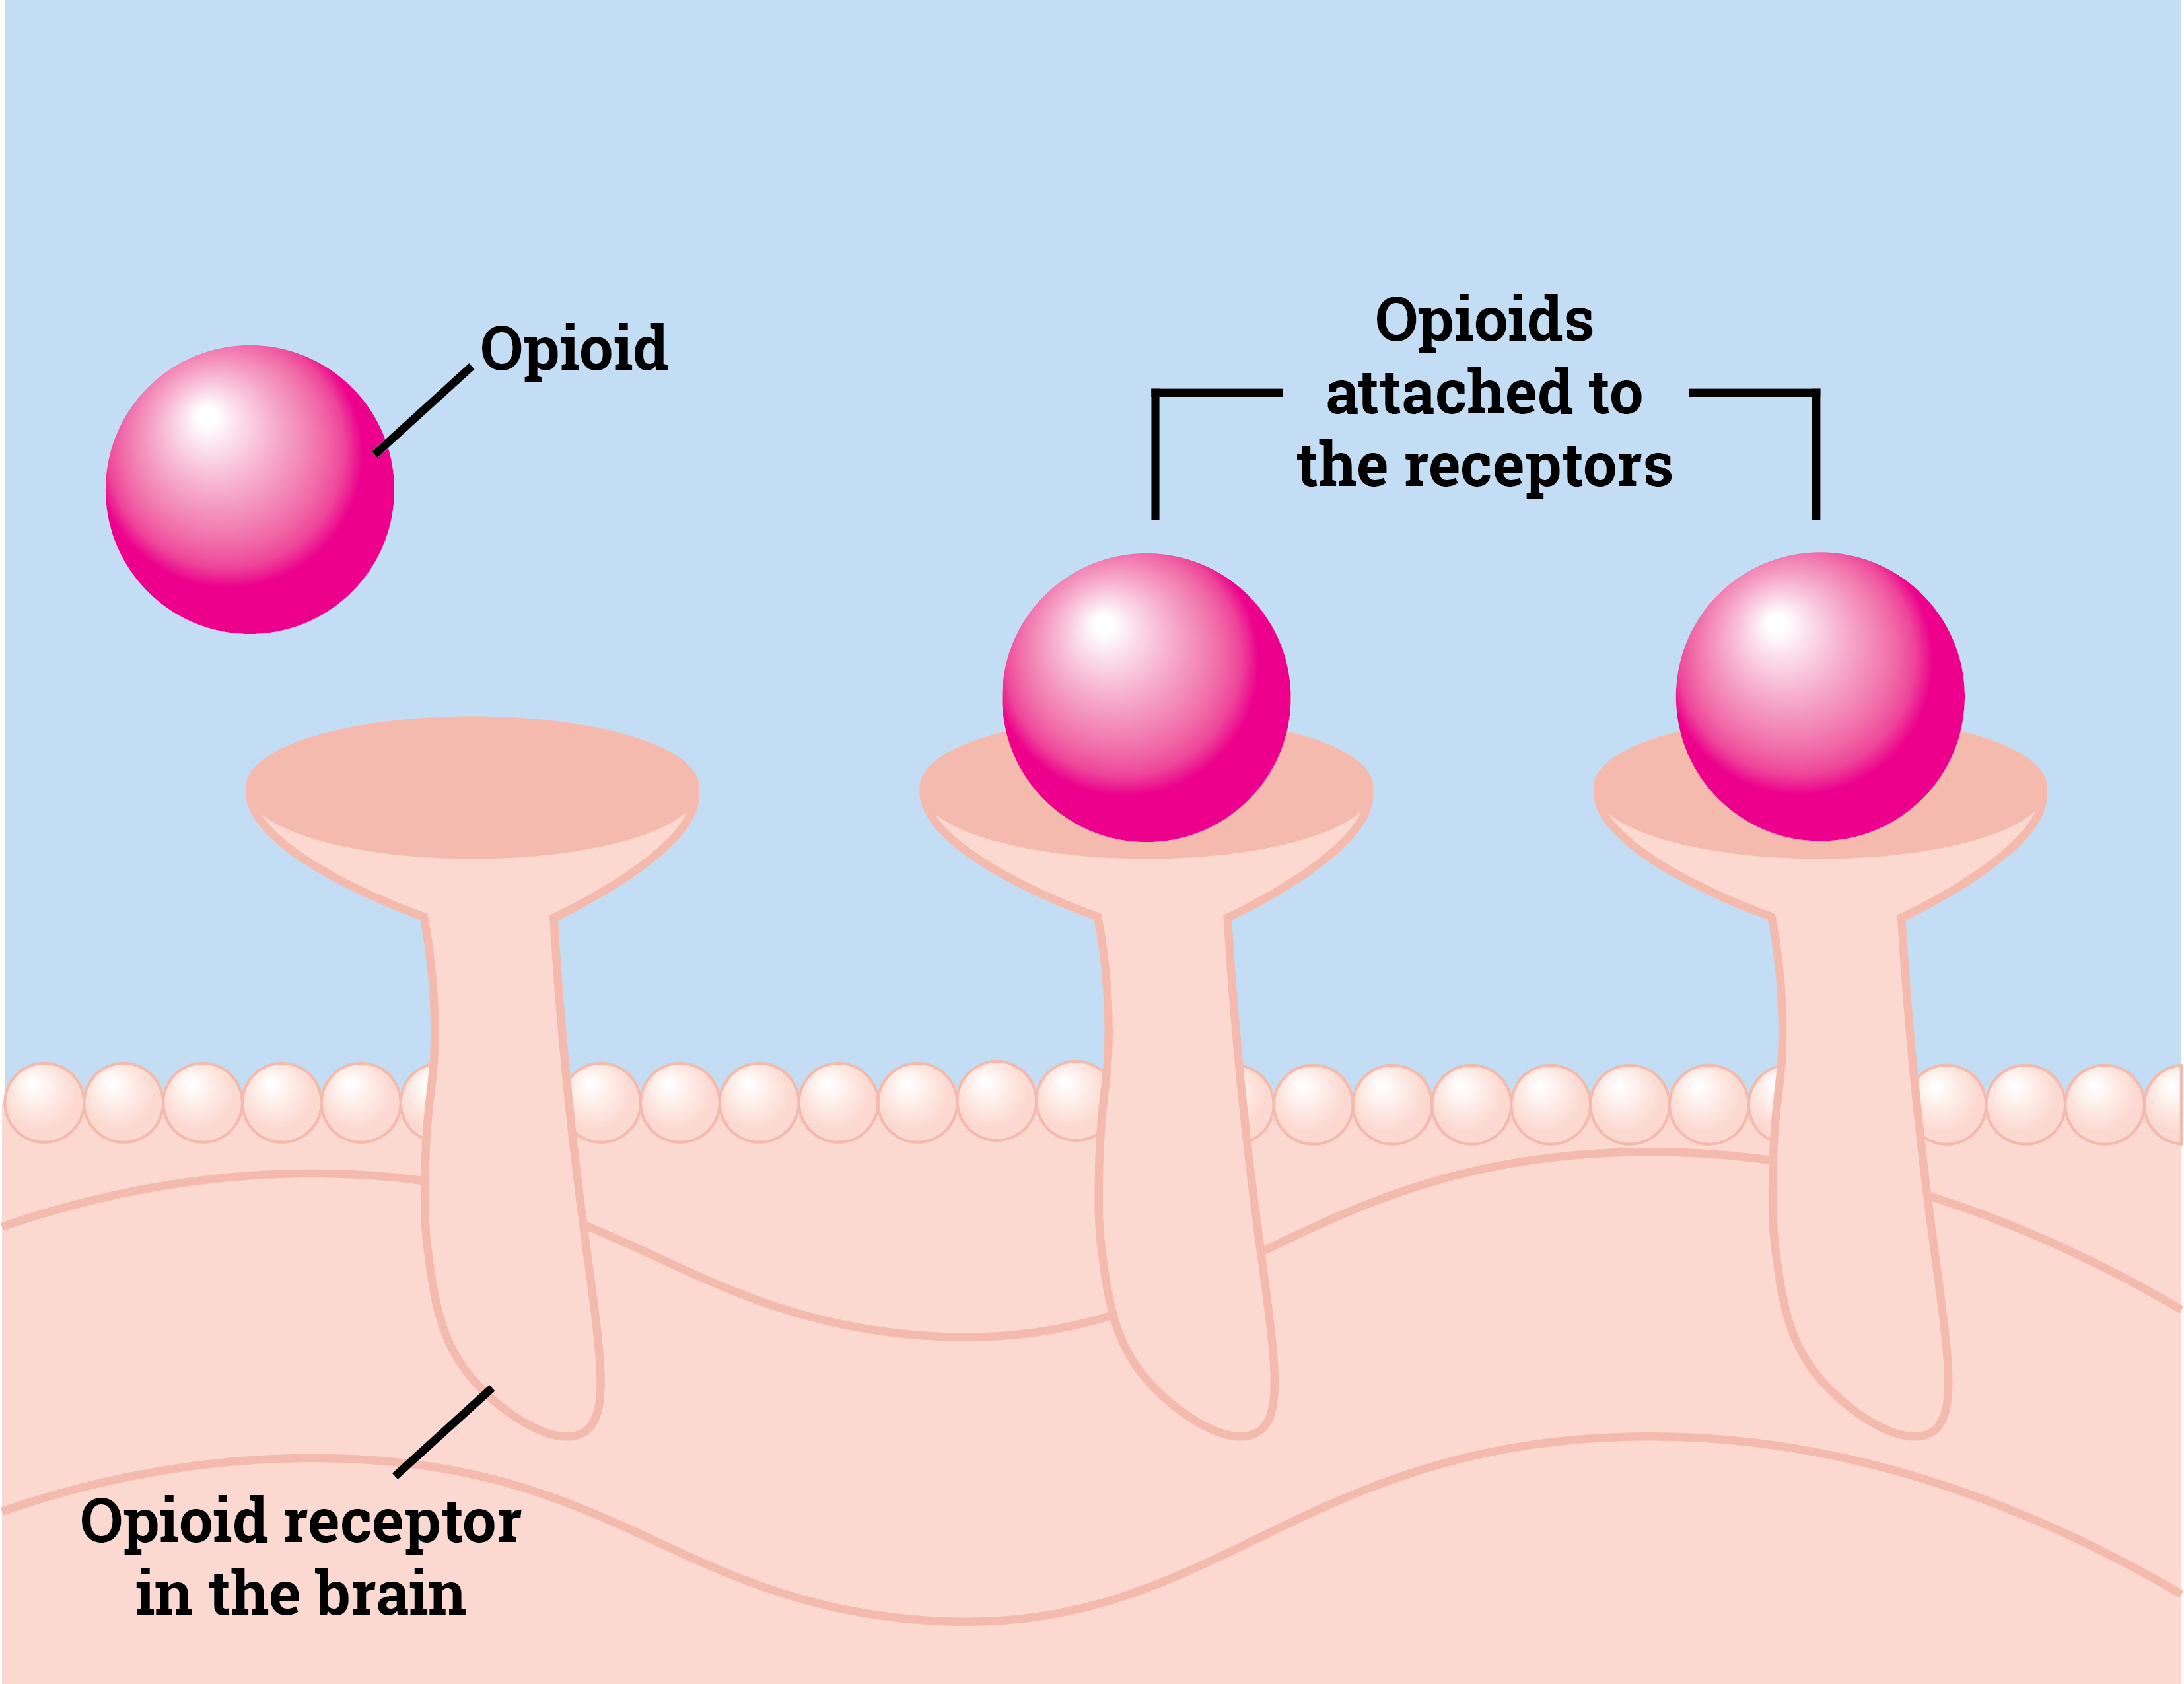 Depiction of opioids attaching to receptors in the brain